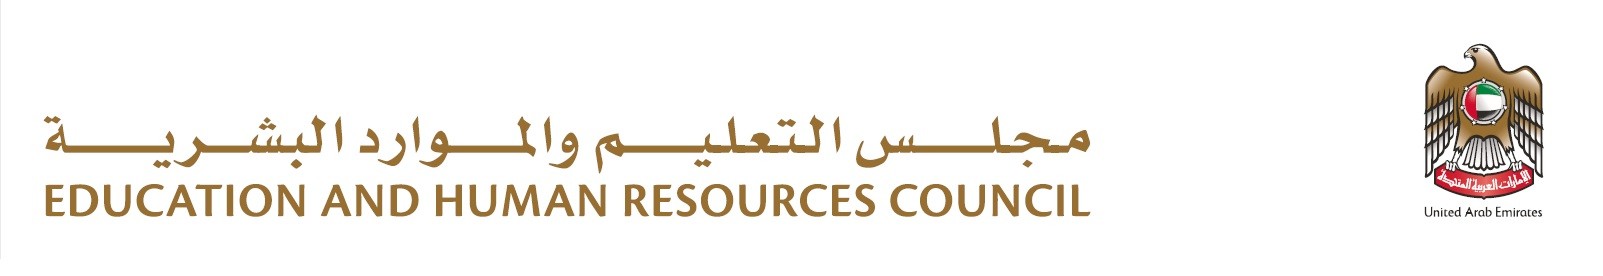 Education and Human Resources Council